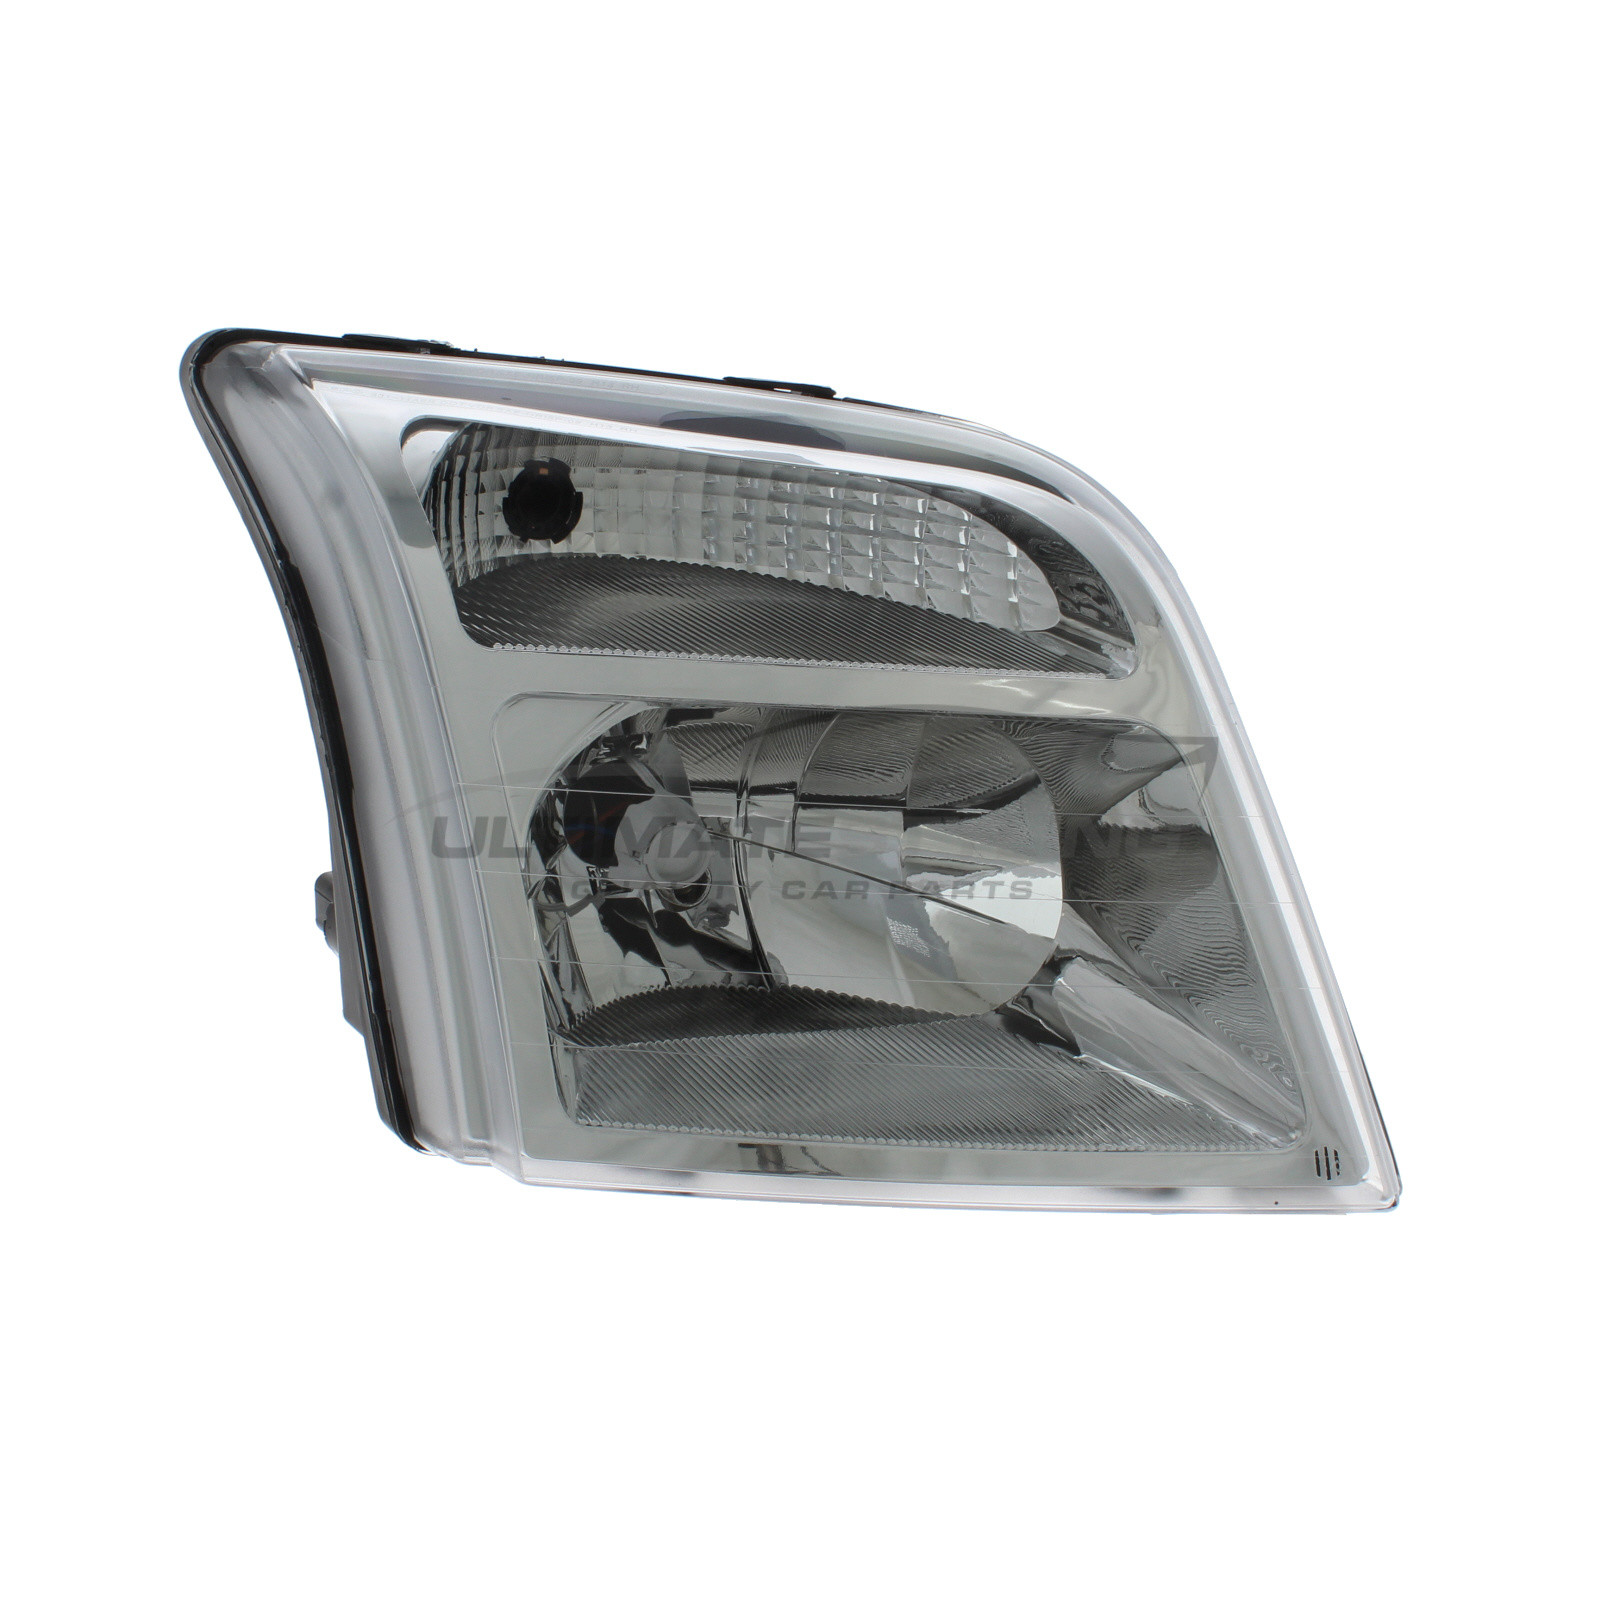 Ford Tourneo Connect 2002-2013, Transit Connect 2002-2013 Halogen, Electric With Motor, Chrome Headlight / Headlamp Drivers Side (RH)